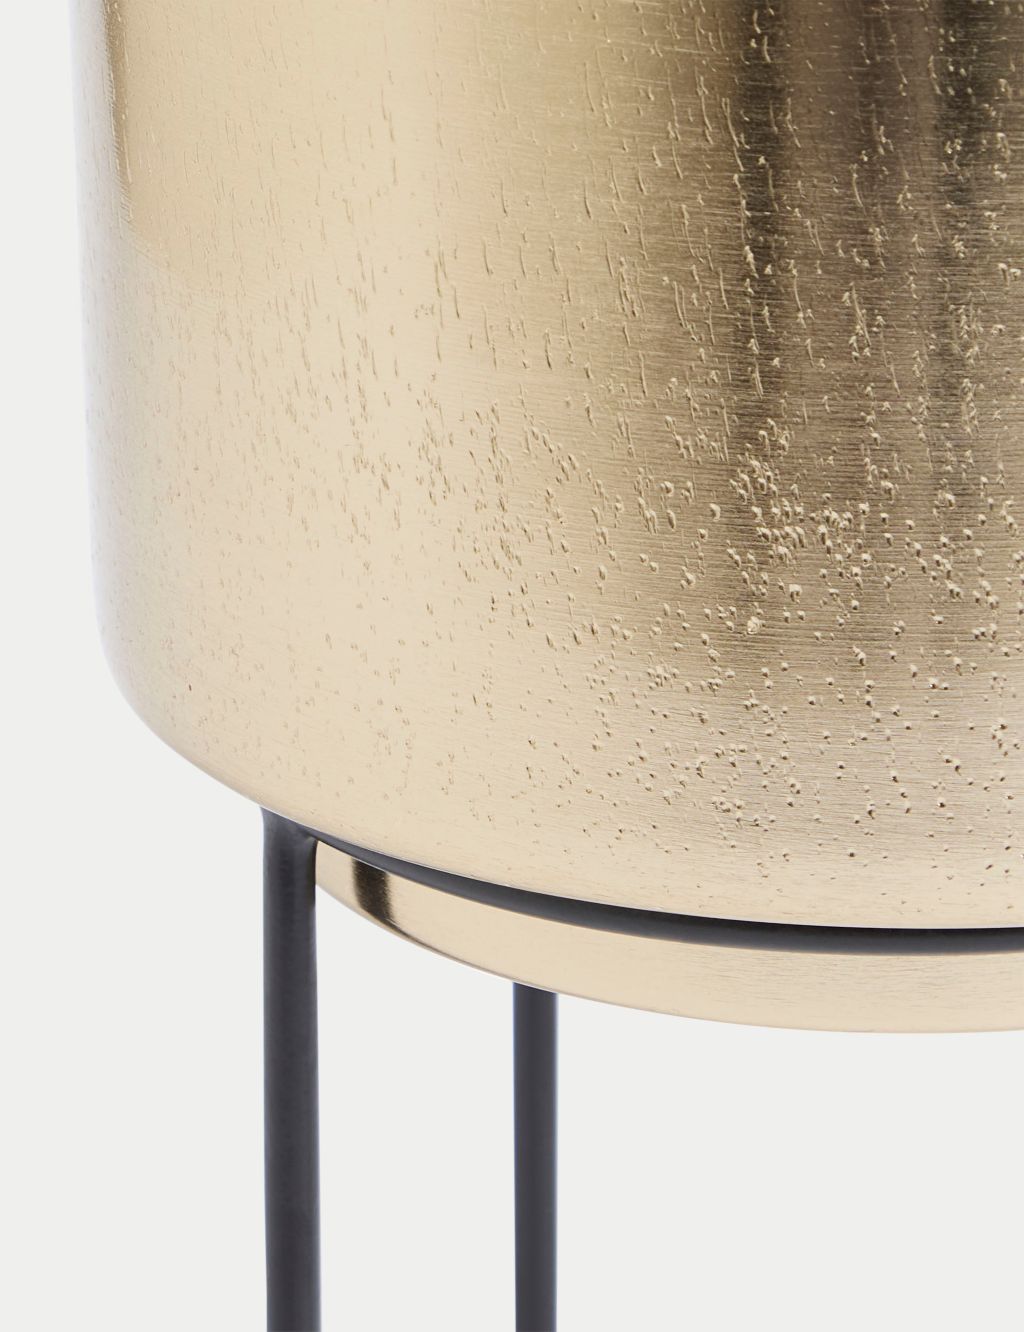 Medium Textured Gold Planter with Stand 2 of 3